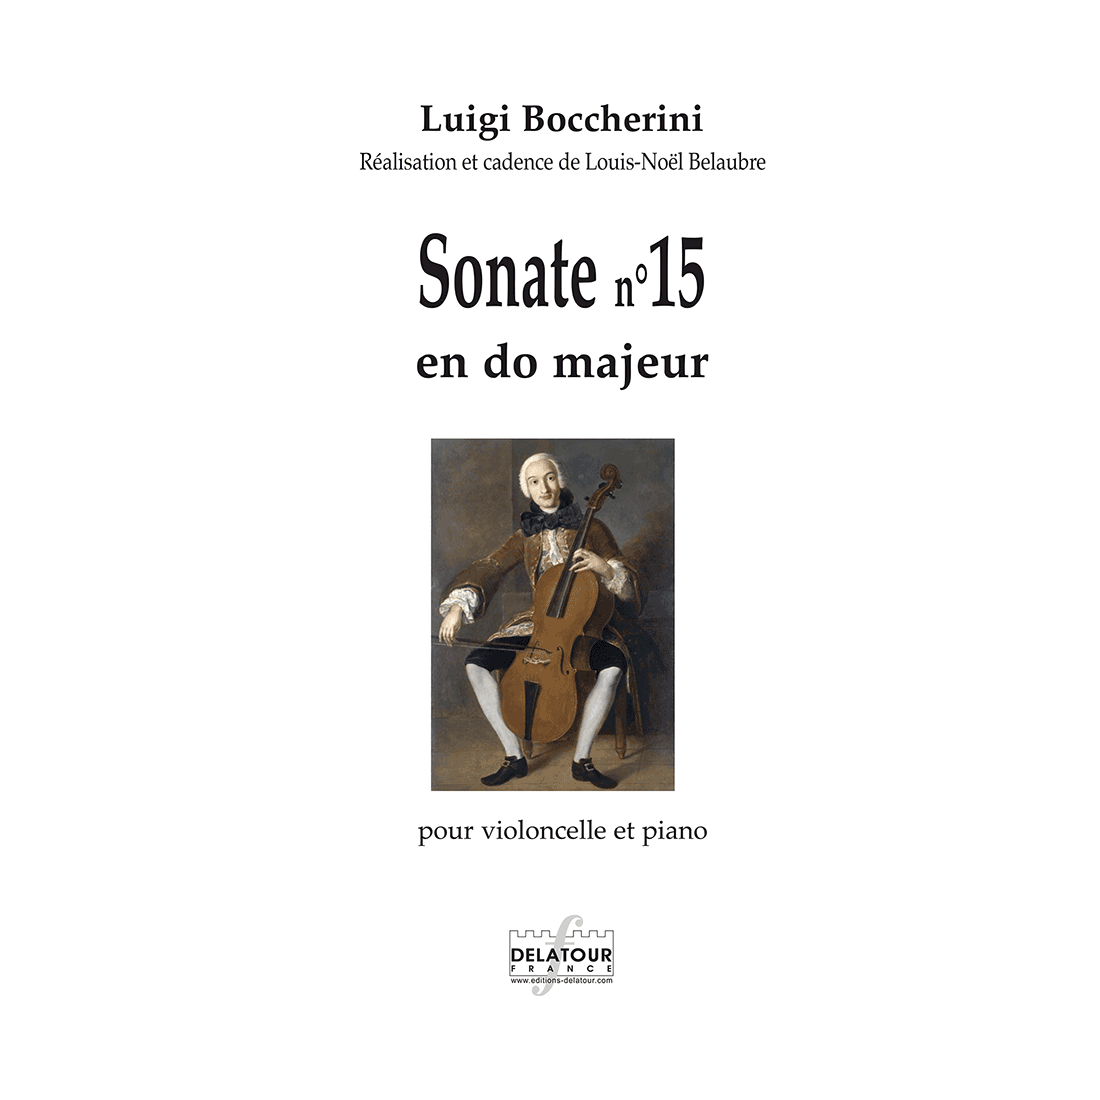 Sonate n°15 en do majeur for cello and piano